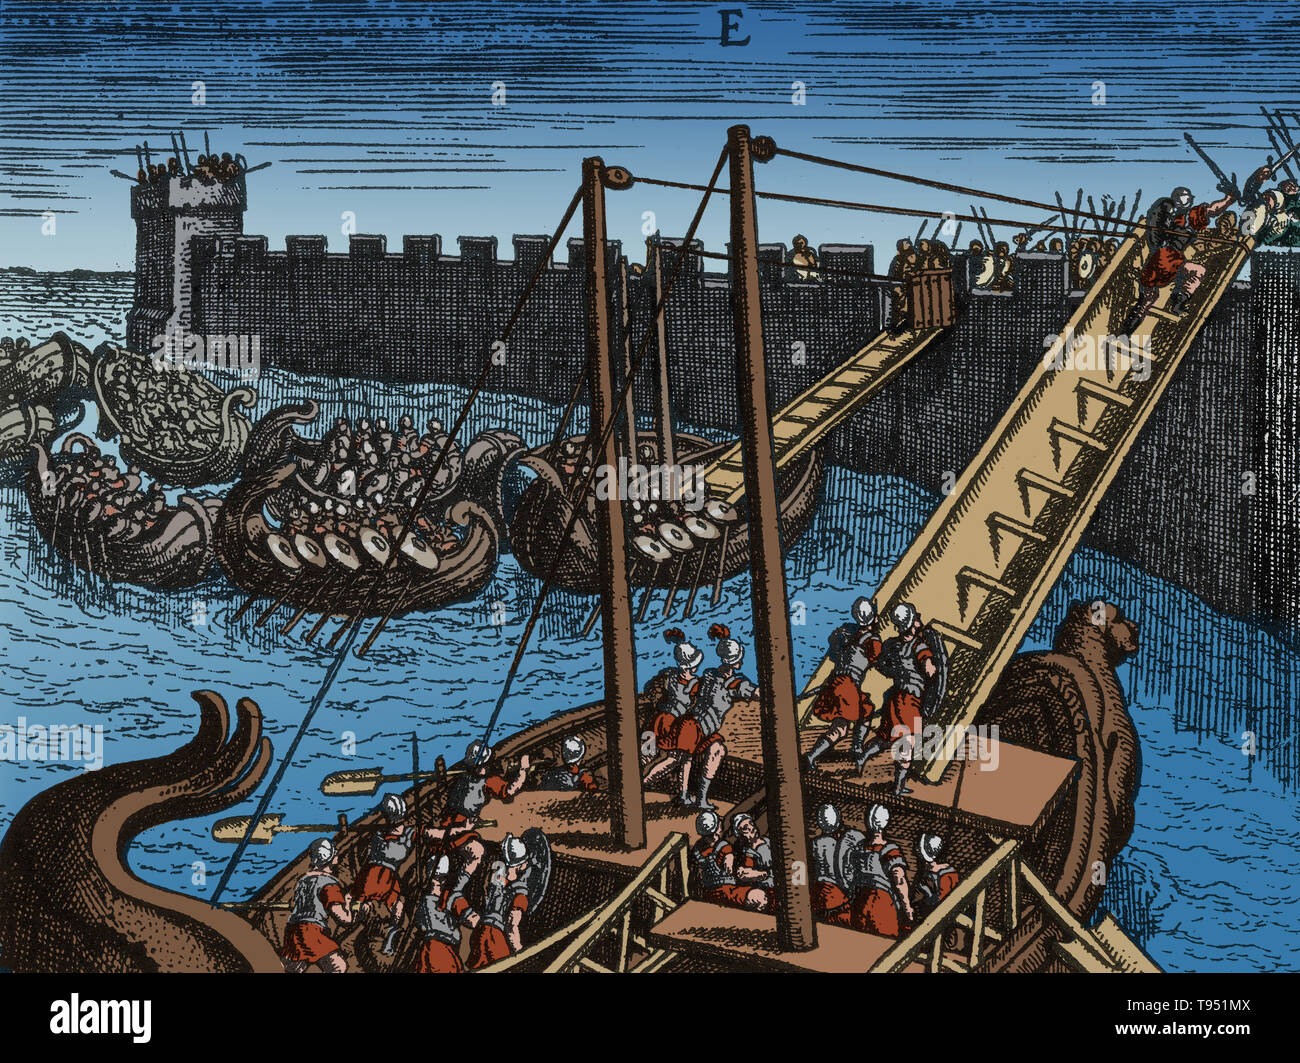 Roman soldiers scaling the walls of a fortress using ladders mounted on boats. Image taken from "Poliorceticon sive de machinis tormentis telis" by Justus Lipsius (Joost Lips), 1602 edition. The Romans designed weaponry that both gave some protection to their men but also were designed to smash into fortifications. Siege towers were used to get troops over an enemy curtain wall. When a siege tower was near a wall, it would drop a gangplank between it and the wall. Stock Photo